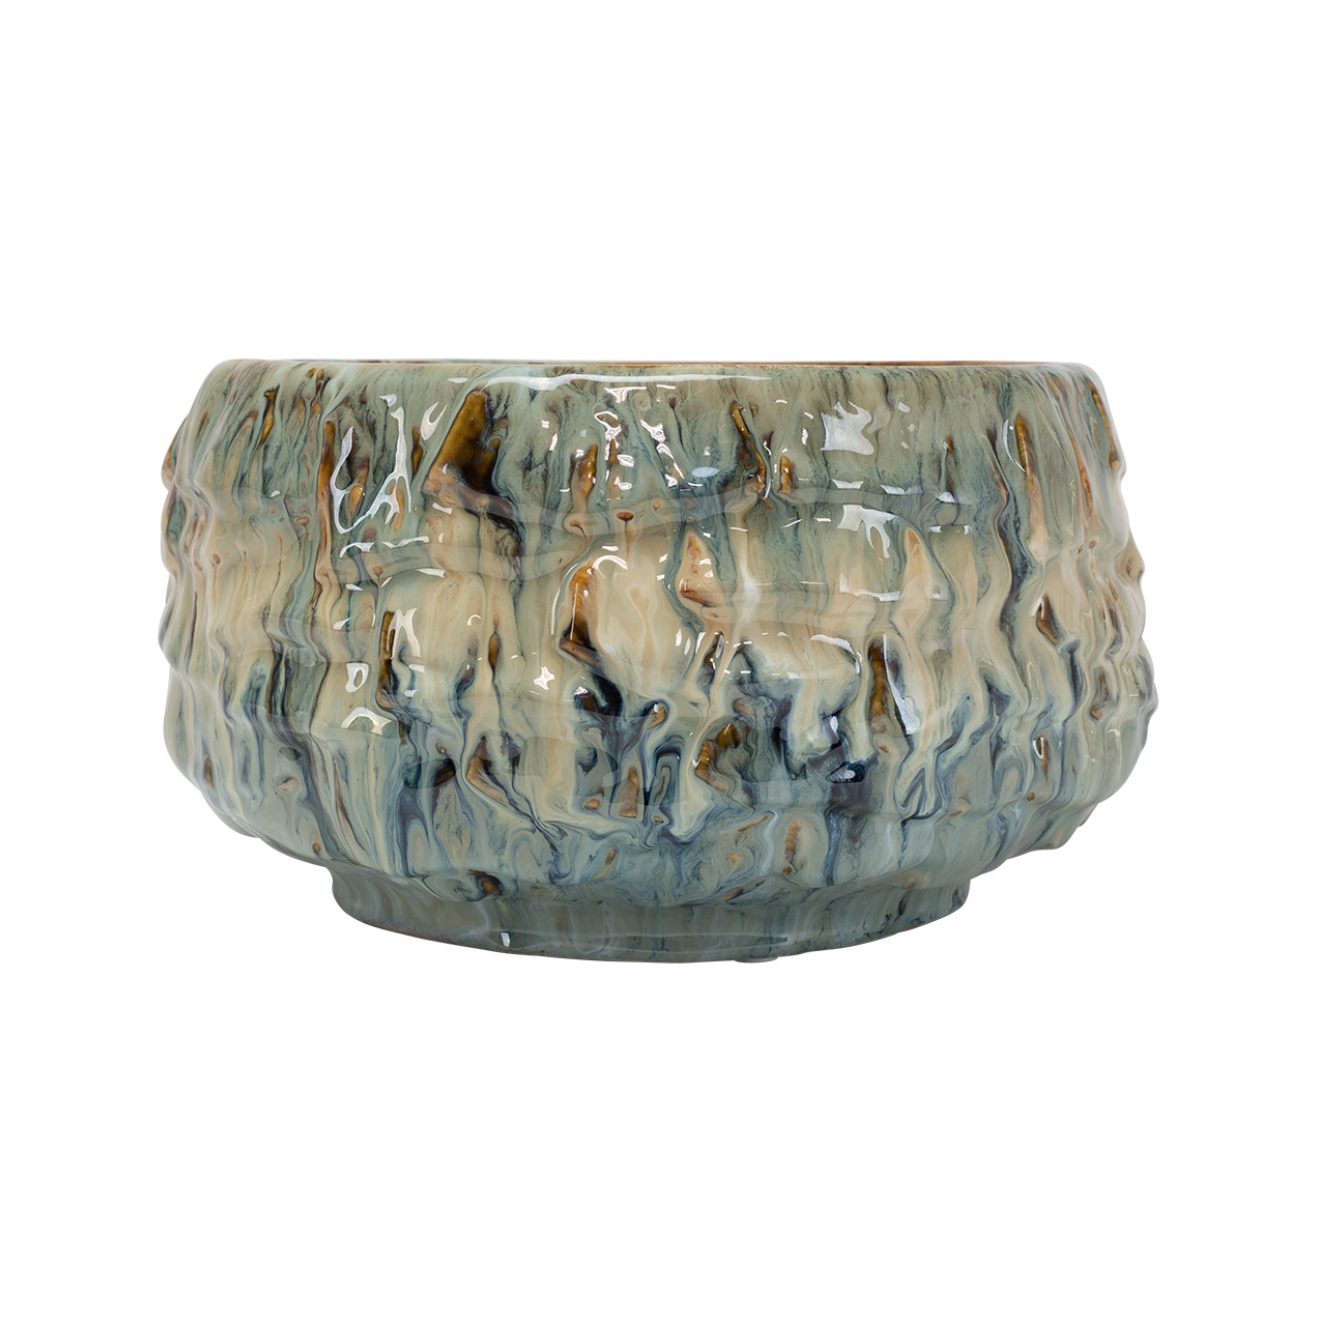 A Bremen Bowl from The Import Collection with a textured, glossy glaze in shades of blue, gray, and brown reminiscent of Scottsdale Arizona&#39;s desert landscape. The bowl has a wavy, irregular rim and a rustic finish, isolated on a white background.